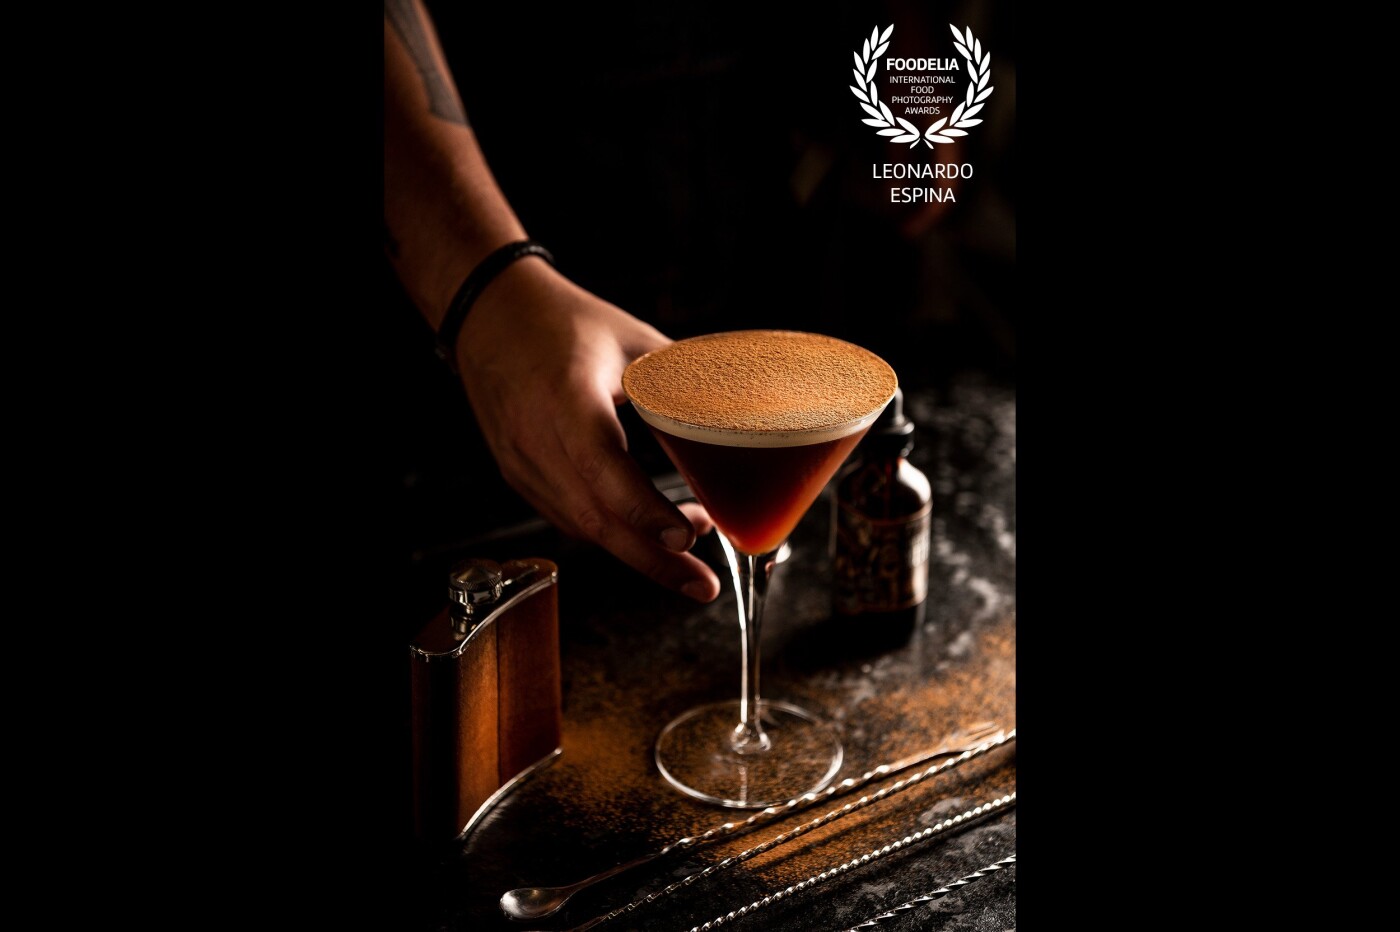 Let us delight the senses with this incredible espresso martini. Delicious and very elegant. A masterpiece made in a dark lighting scheme to add more mystery and drama to the scene.